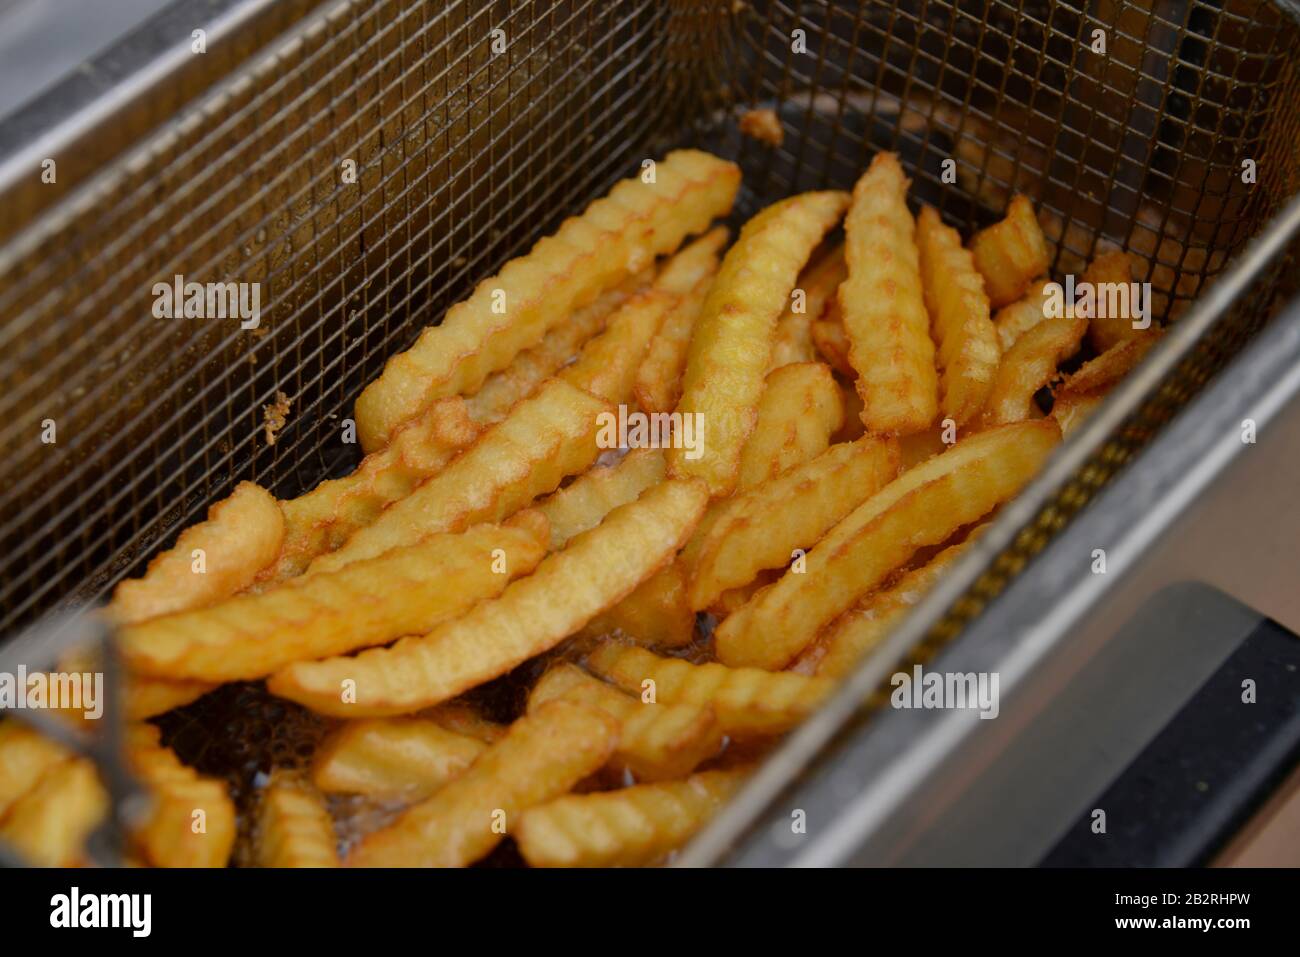 Fritteuse High Resolution Stock Photography and Images - Alamy